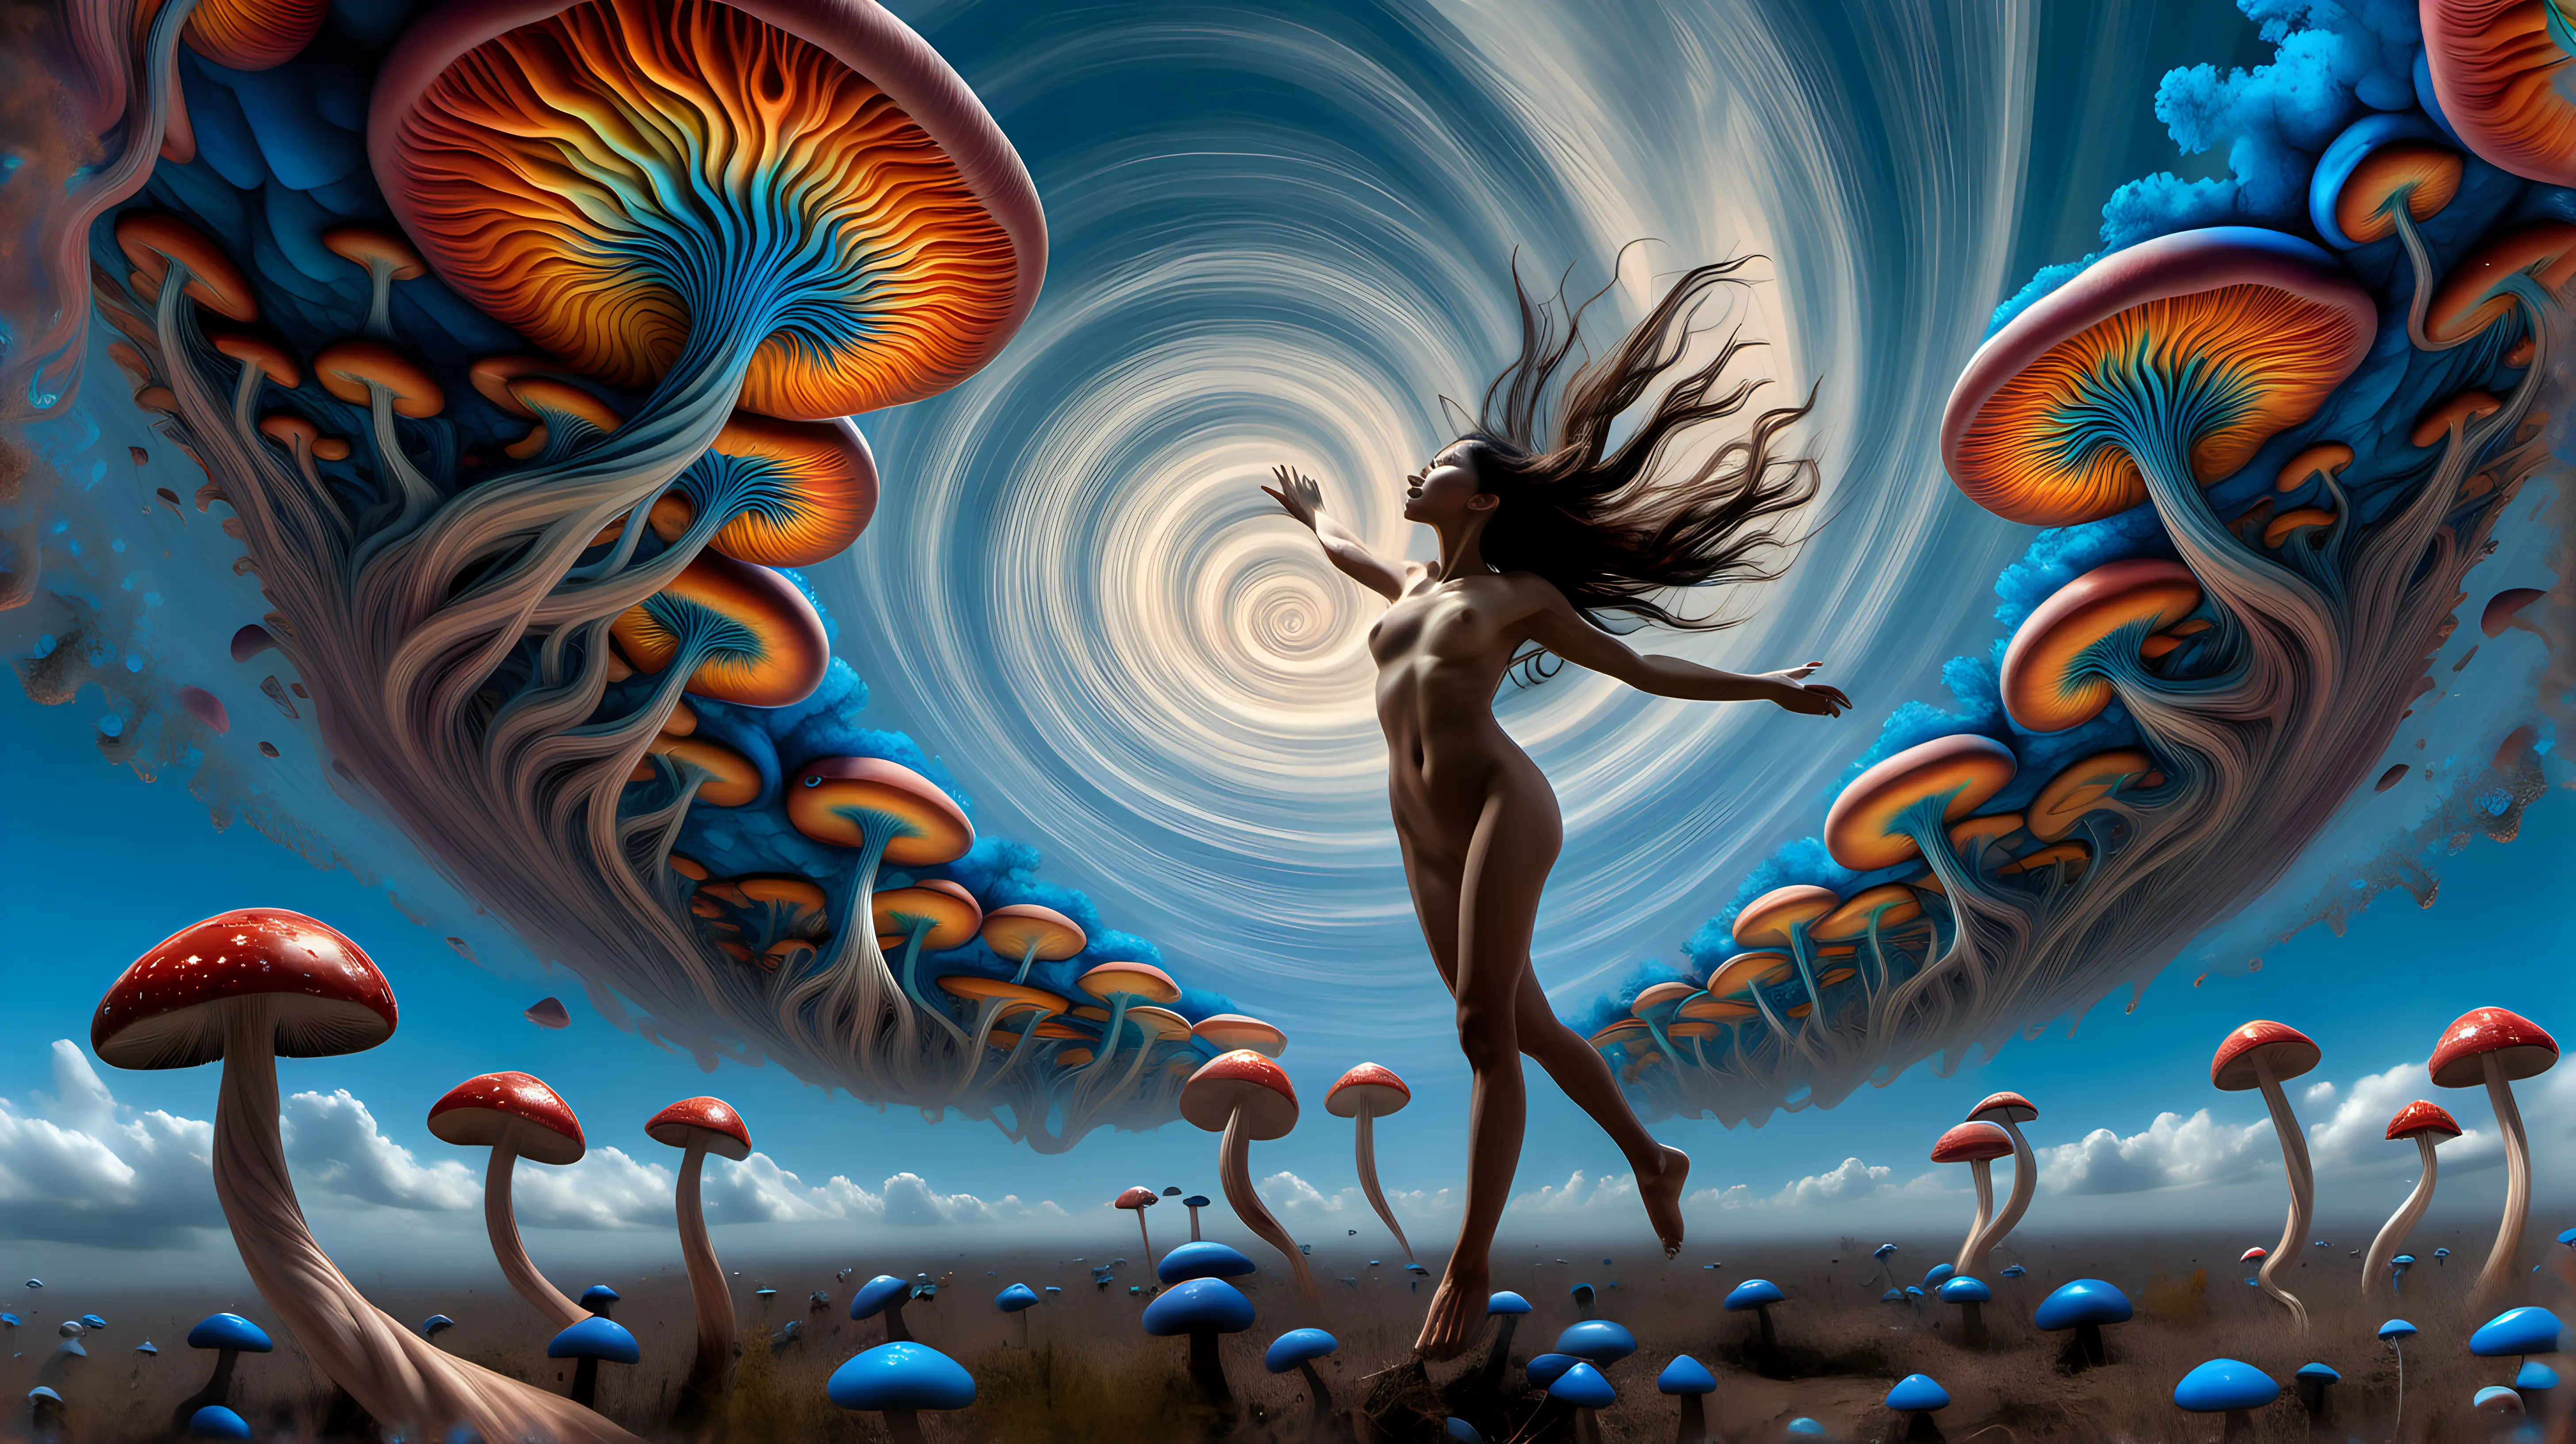 Psychedelic fractal sky with swirling fluid , multicolored blue fractal mushrooms extending from the ground up to the sky on right and left, nude latina skinned female figure floating in mid air facing towards the sky with arms extended, hyper realistic, moody and euphoric